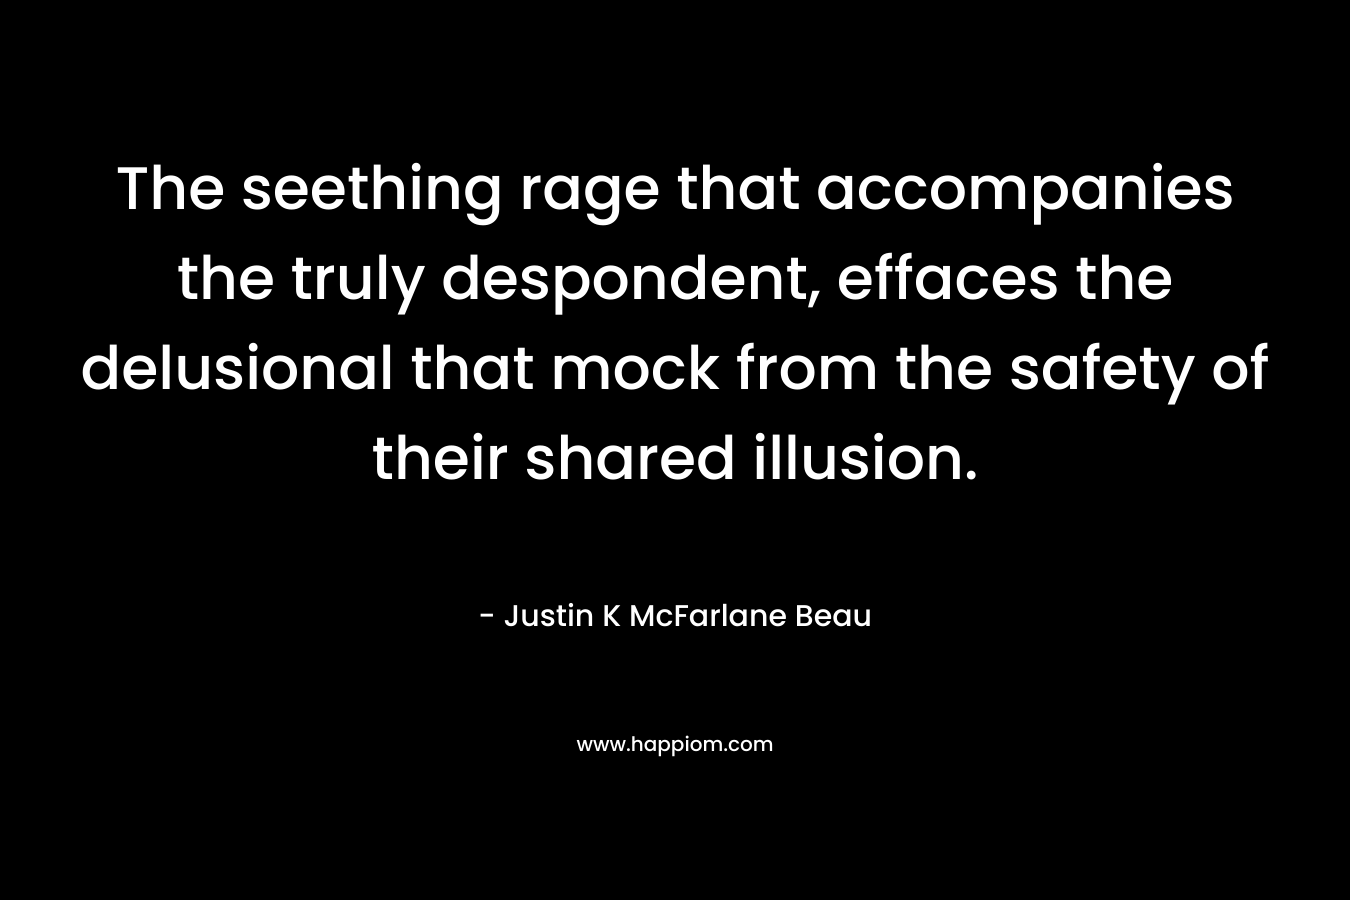 The seething rage that accompanies the truly despondent, effaces the delusional that mock from the safety of their shared illusion. – Justin K McFarlane Beau